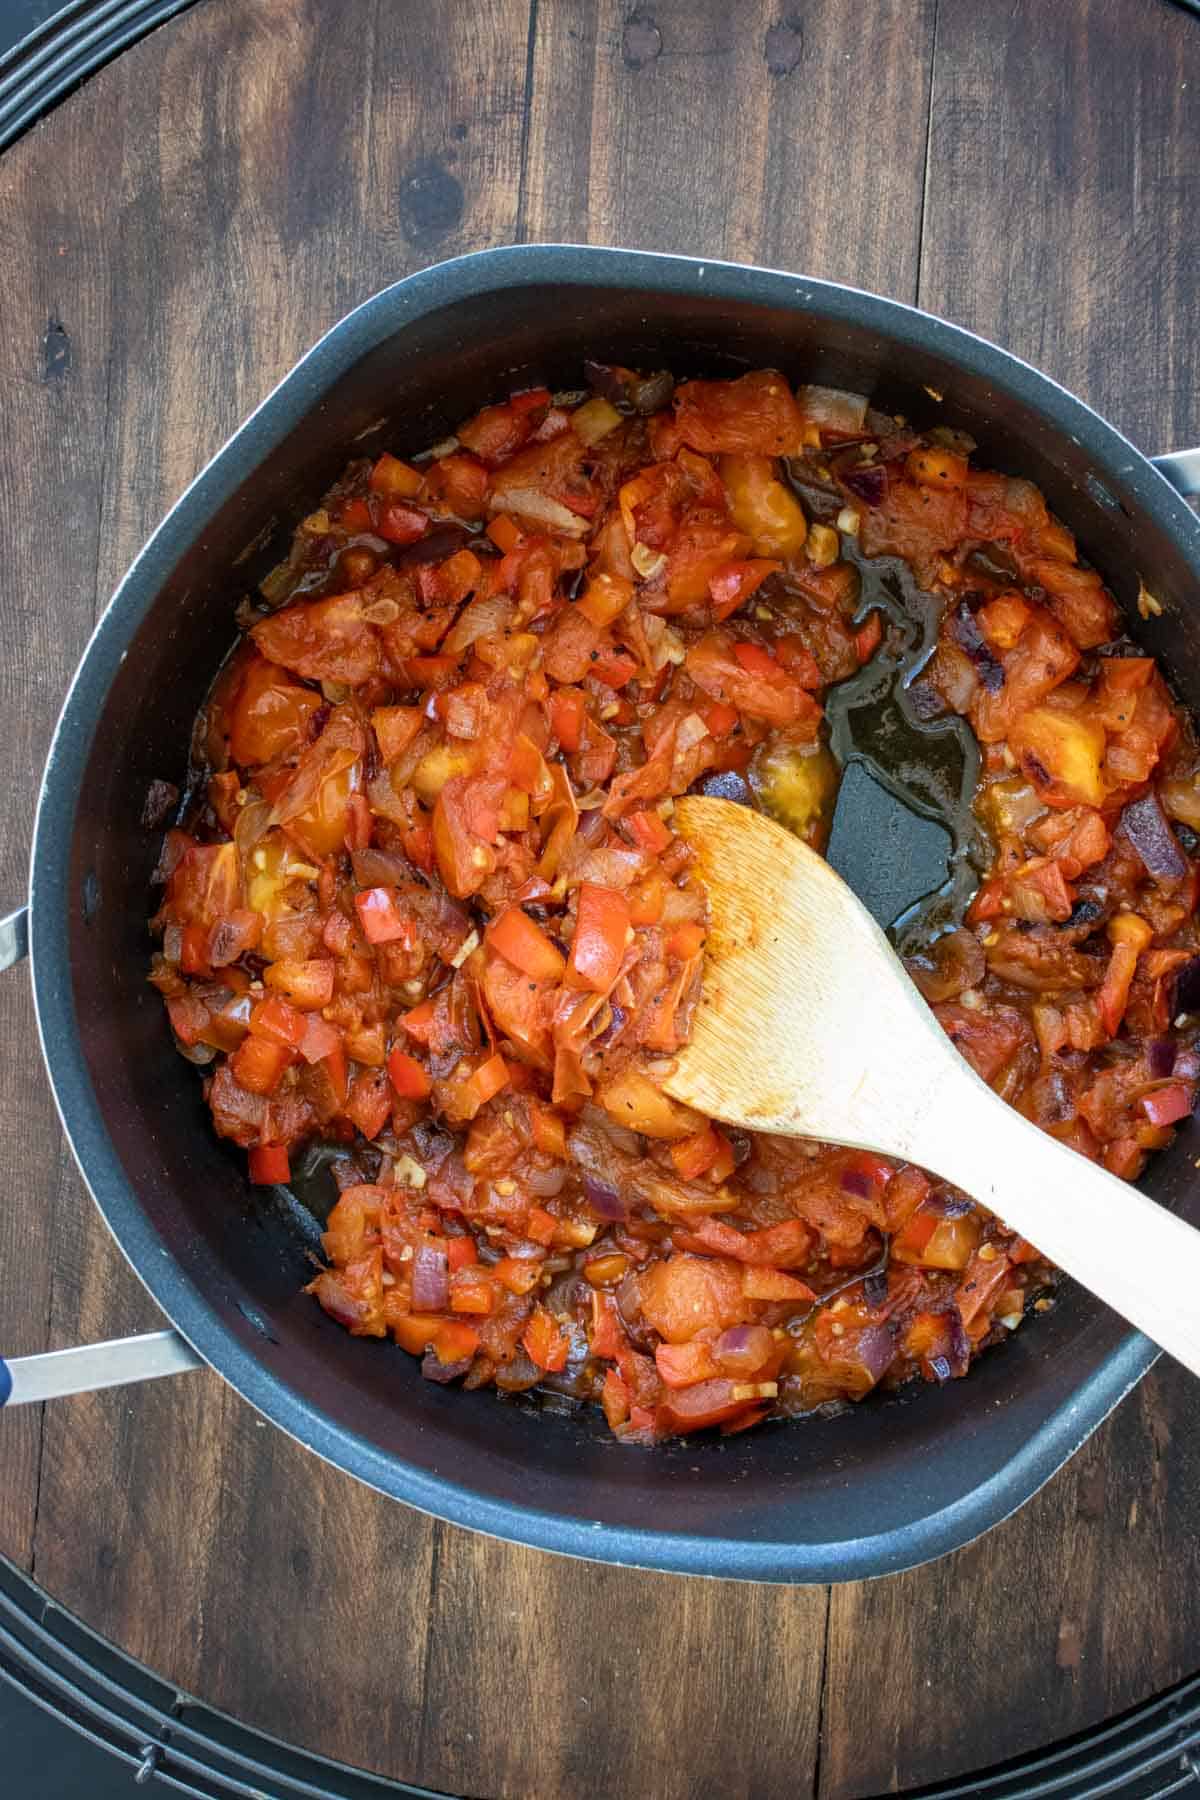 Wooden spoon mixing tomato mix in a pot